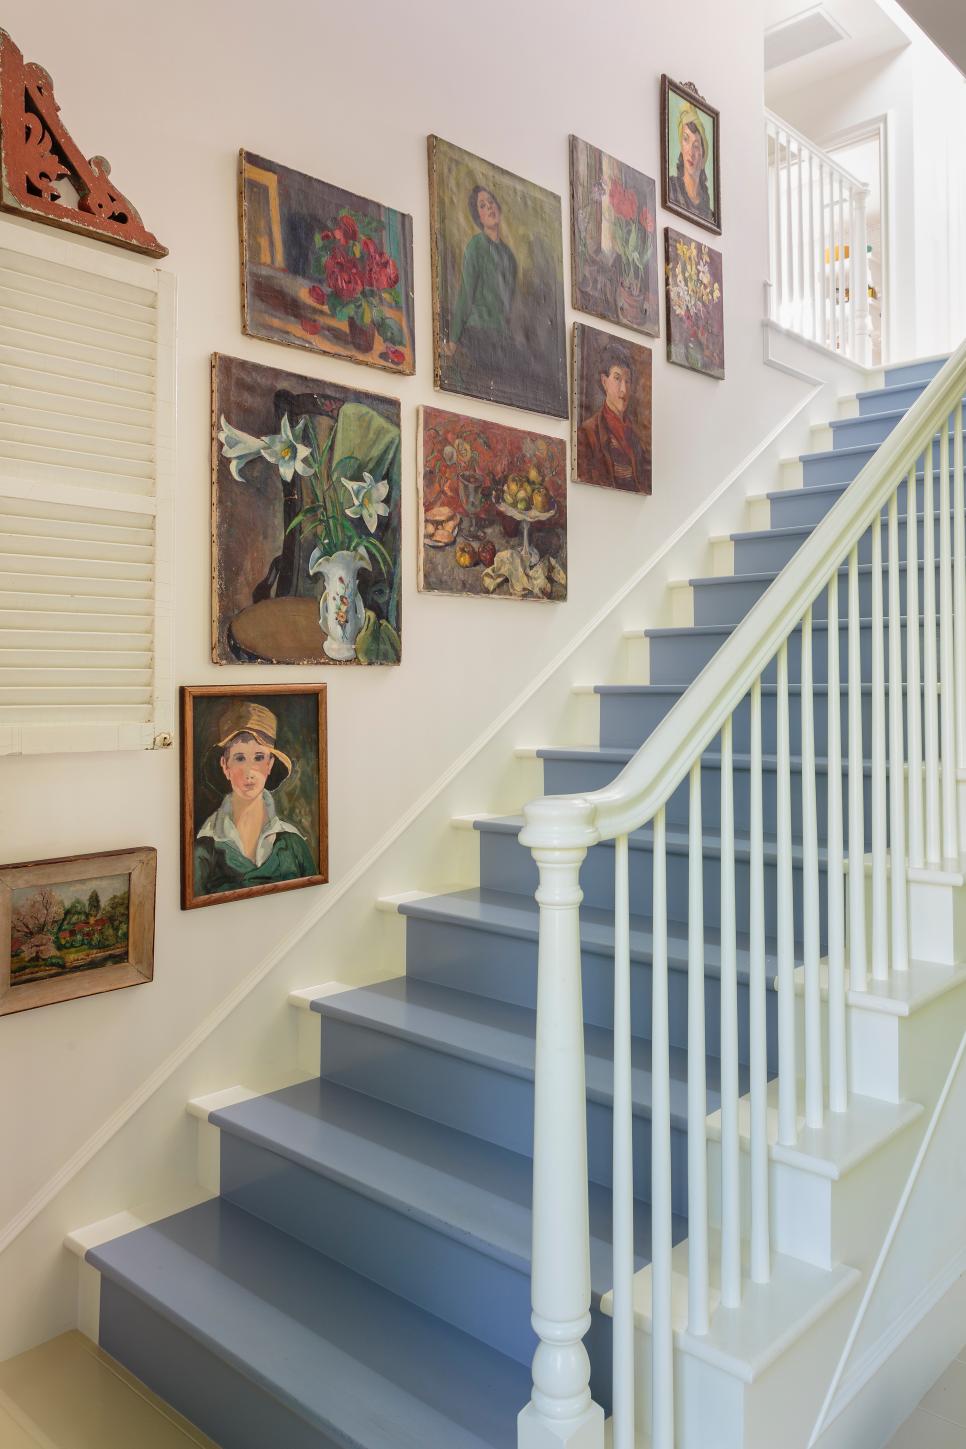 Artwork Lining the Walls of a Stairway HGTV